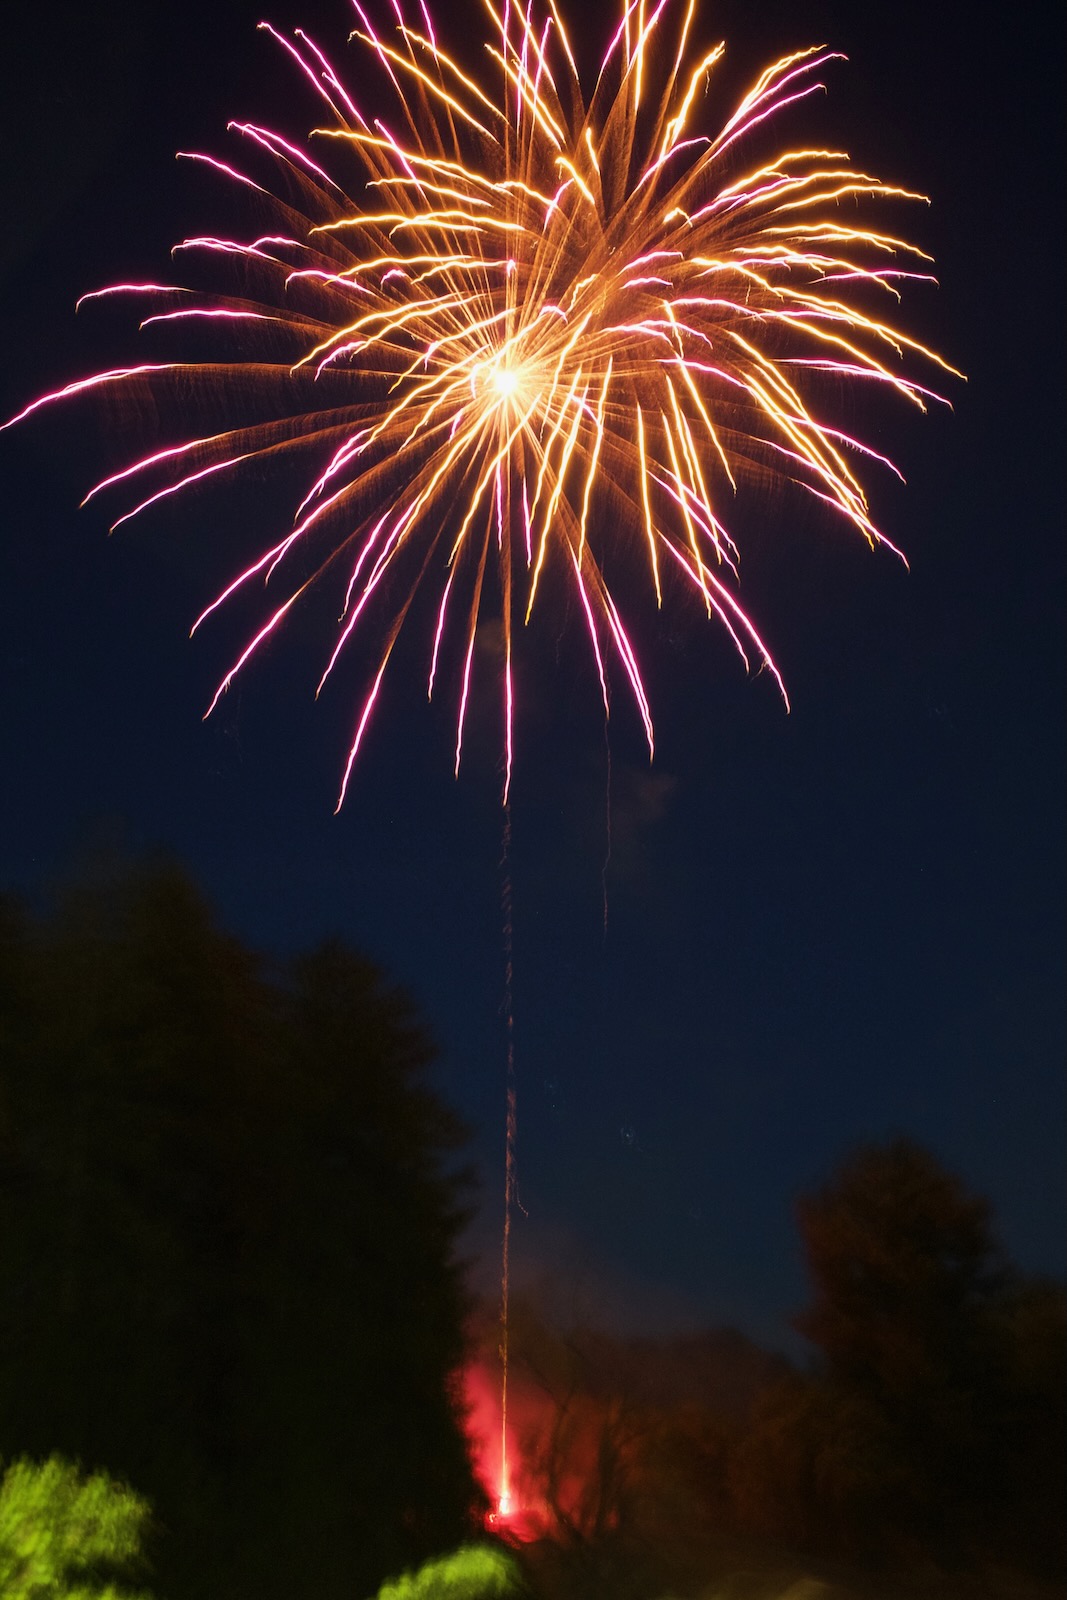 A long exposure of fireworks, with a red smoke trail leading back to where they were launched. In the foreground tree branches are lit up.